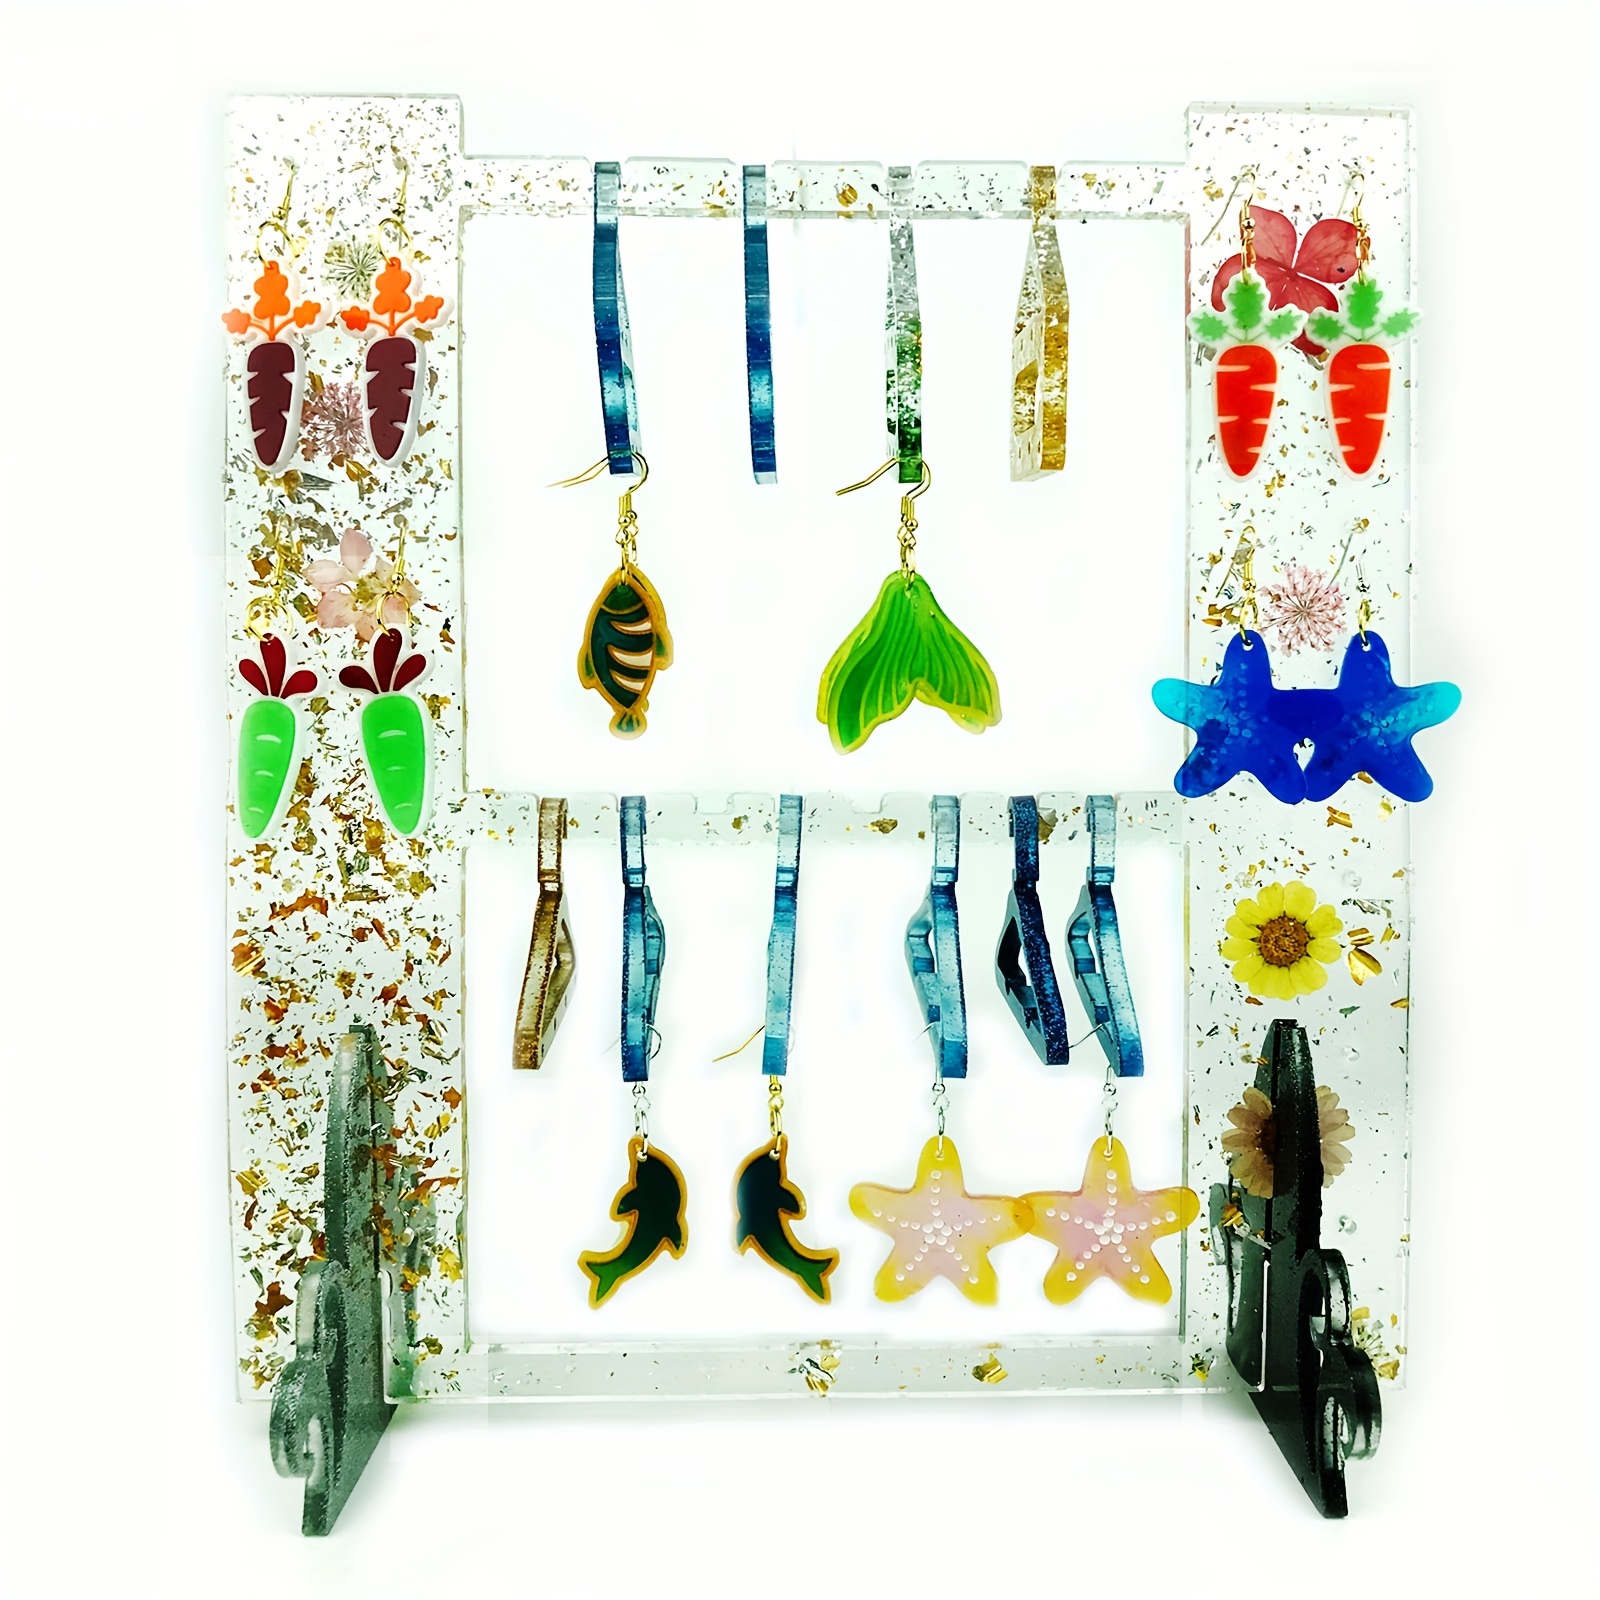 Epoxy Resin Molds for Jewelry Organizer Display and Earring Holder